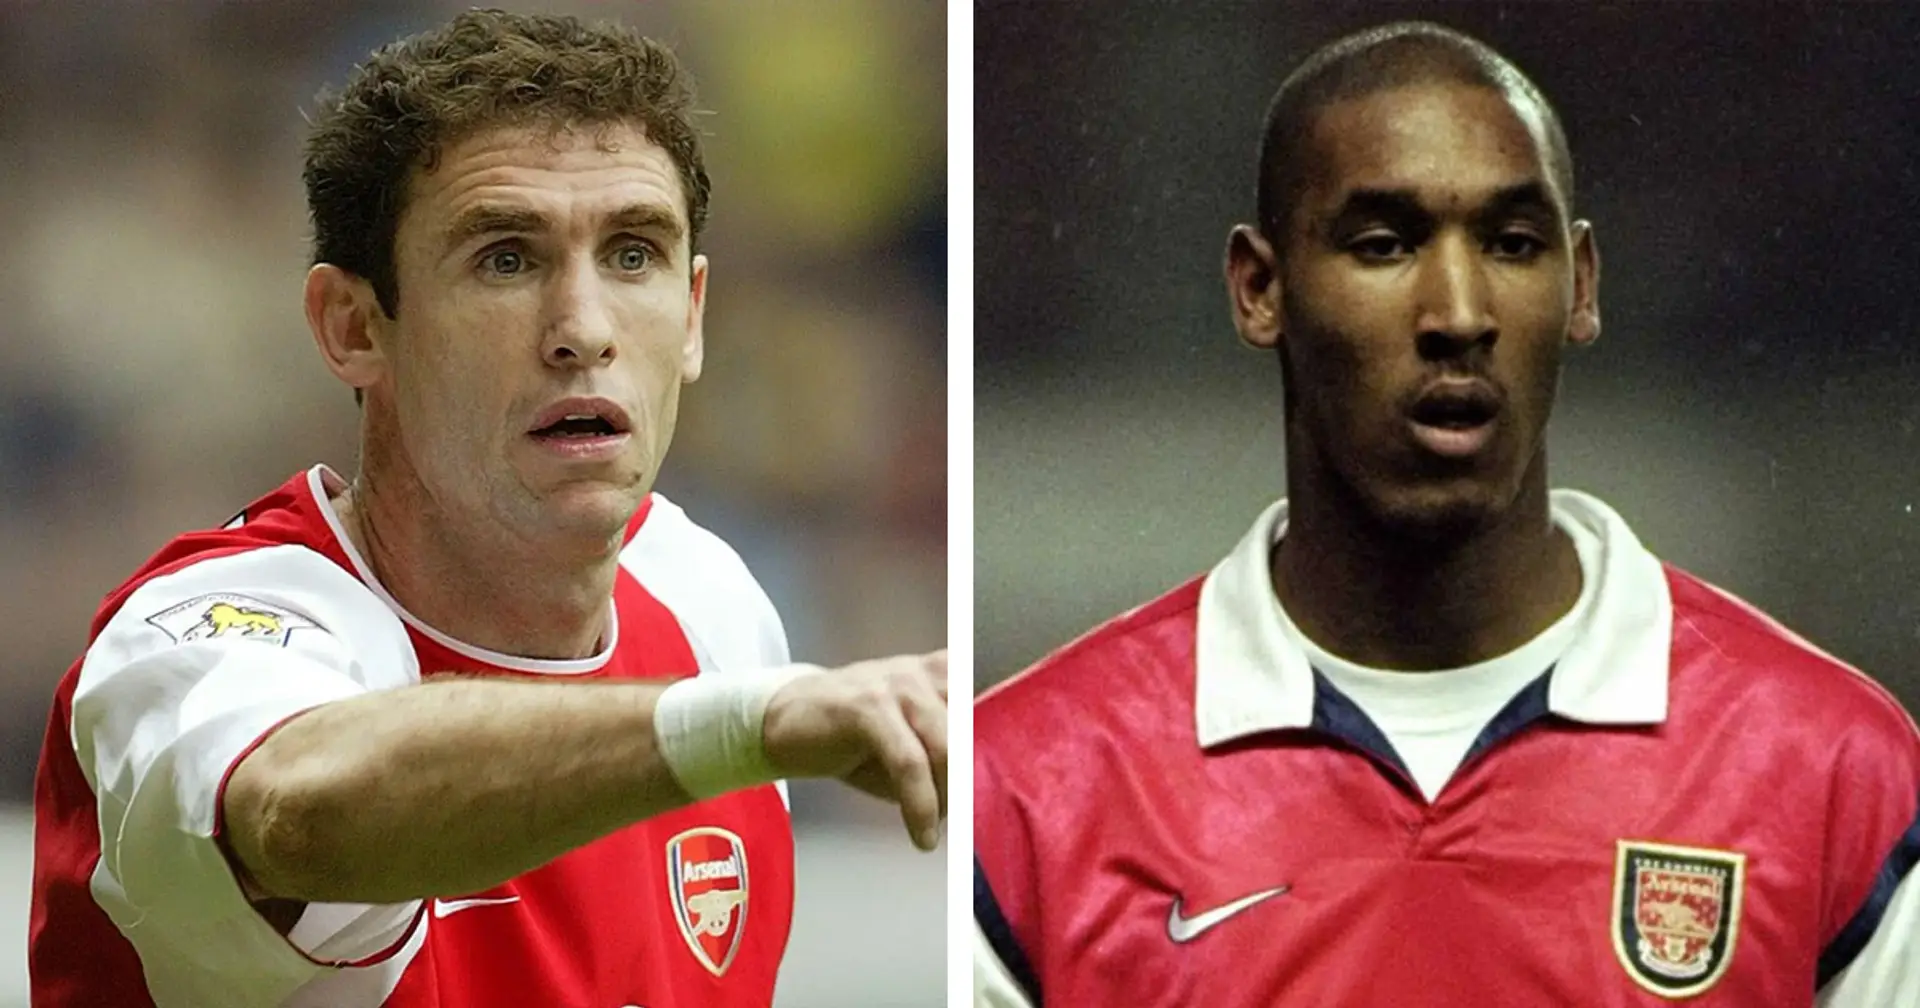 Nicolas Anelka: 'Keown was the toughest. He was fast, strong and dirty'